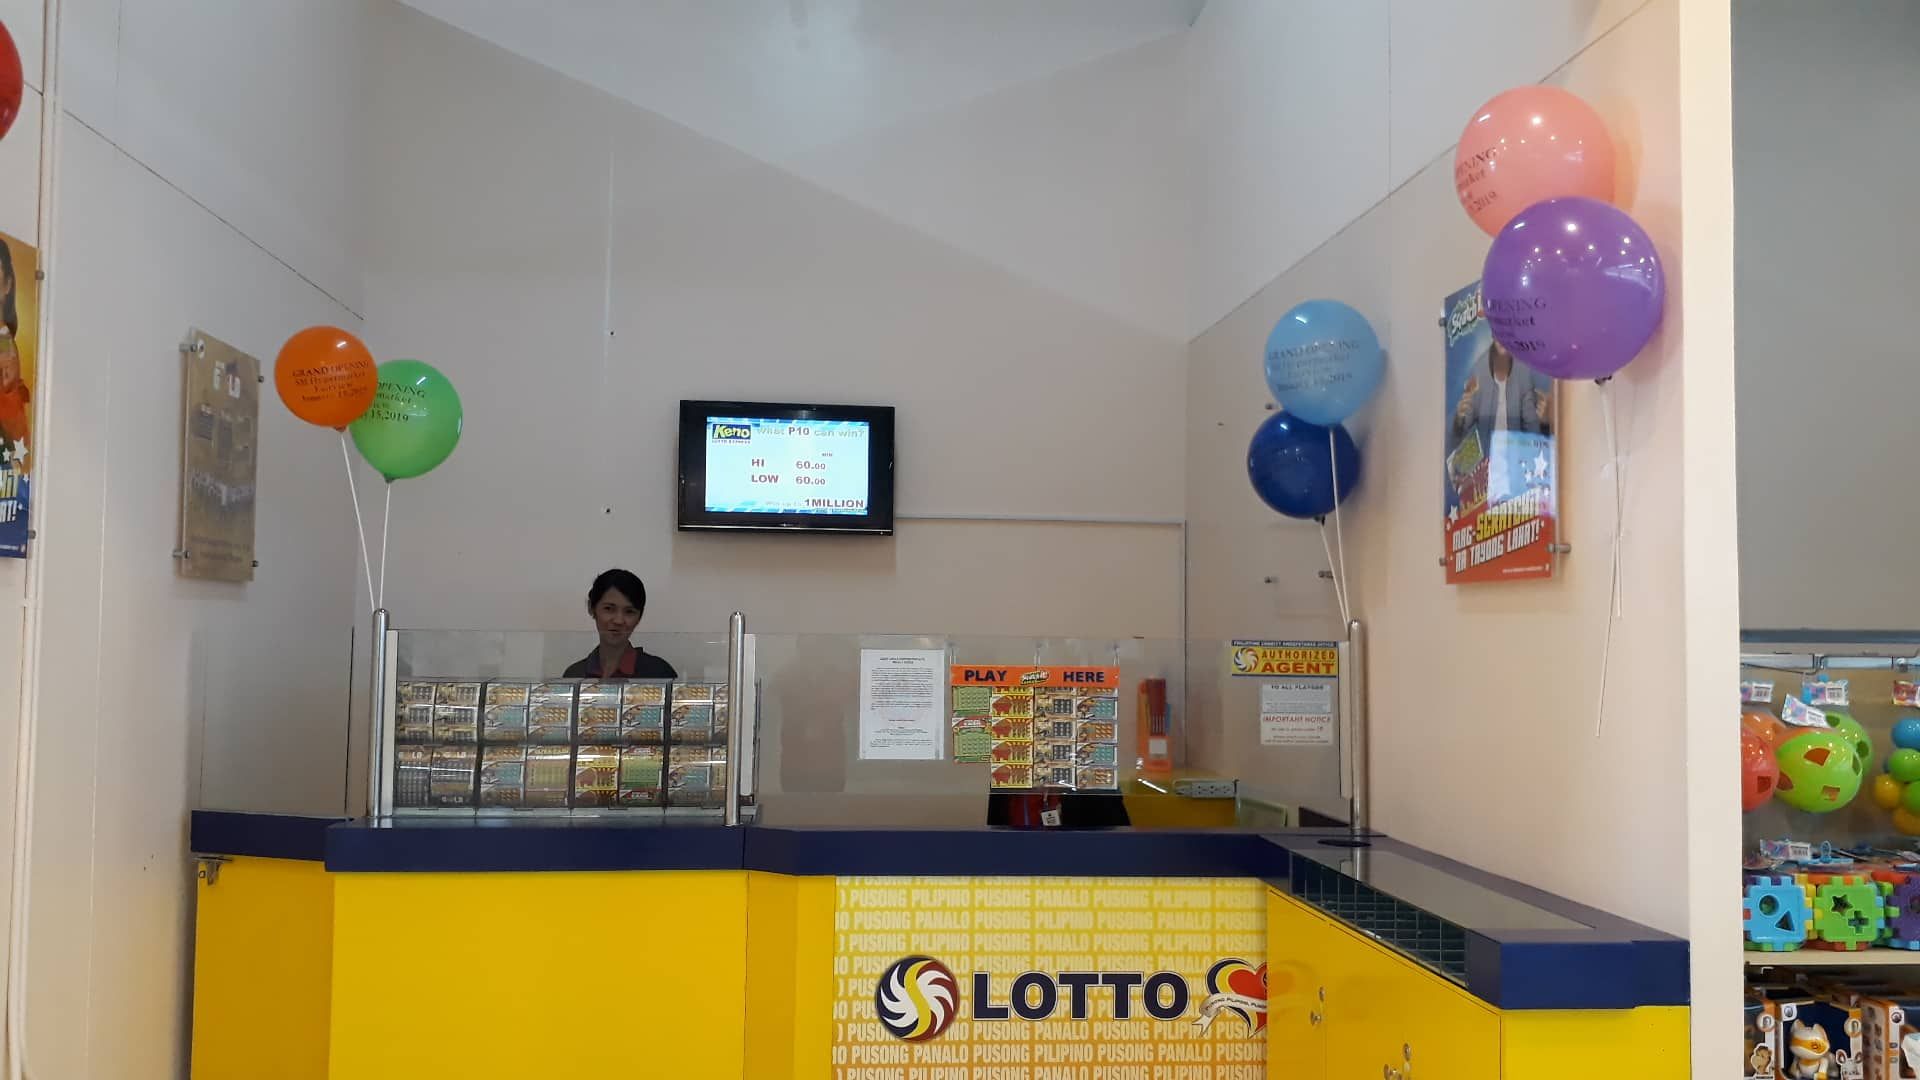 nearest lotto outlet